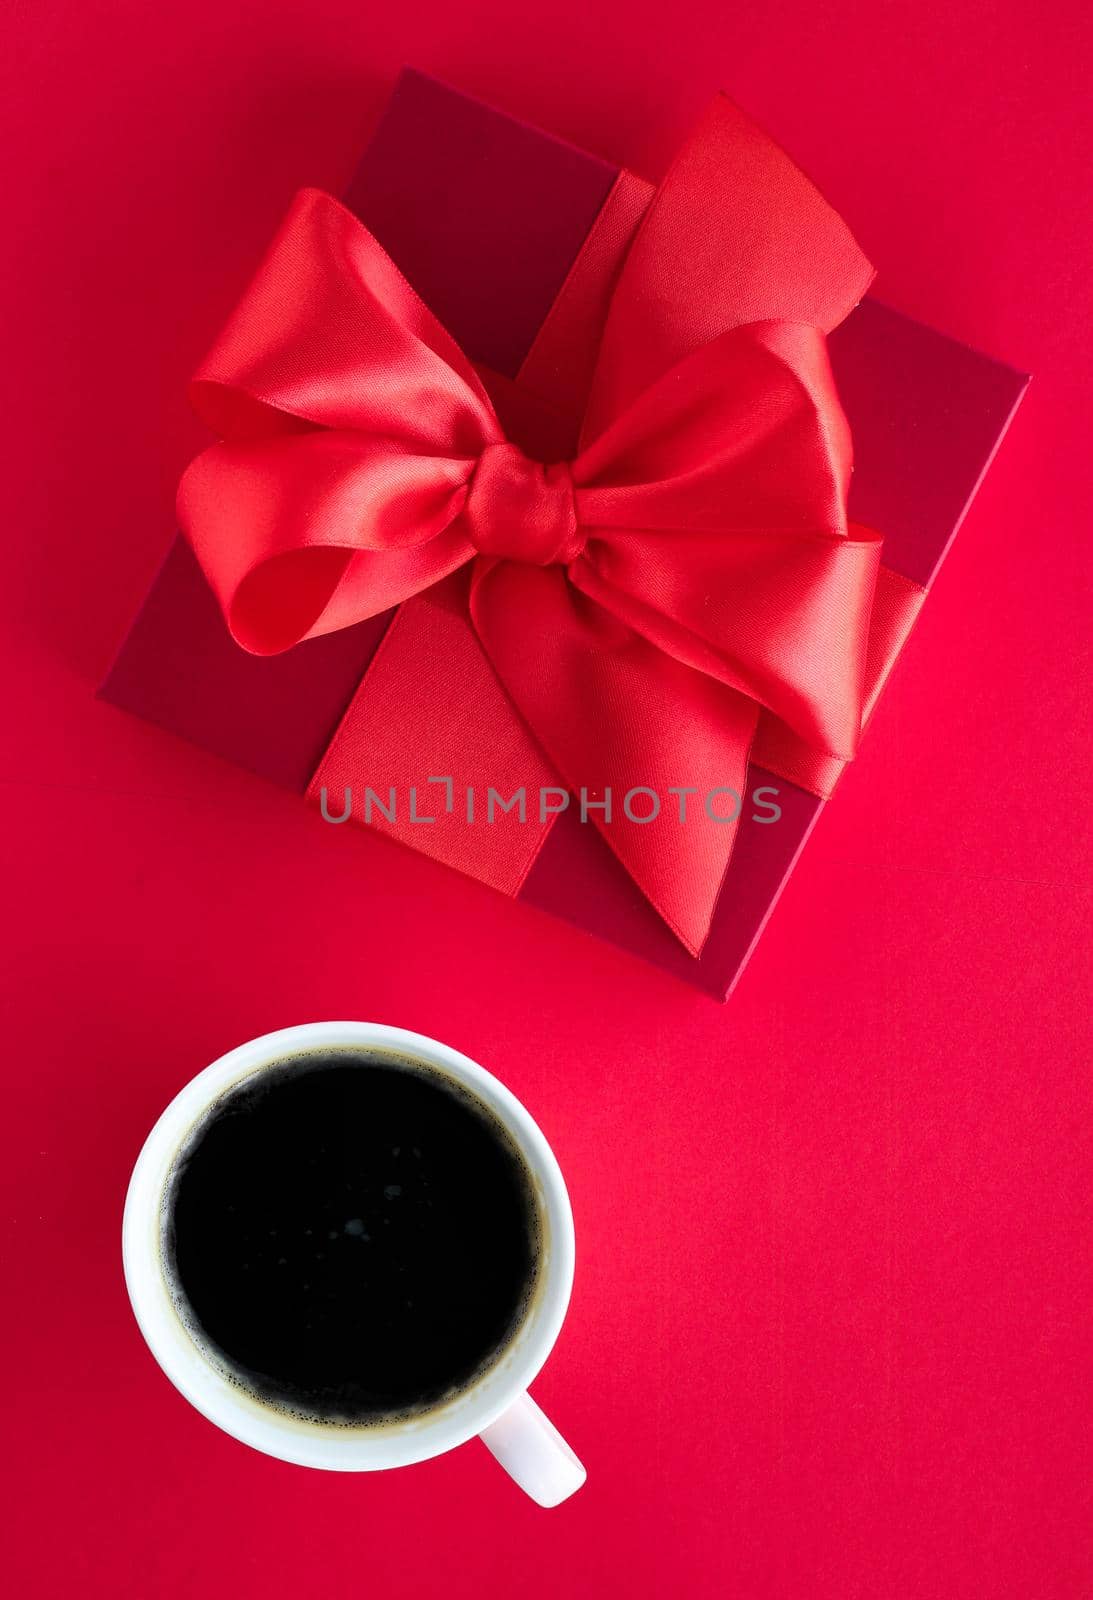 Romantic celebration, lifestyle and birthday present concept - Luxury beauty gift box and coffee on red, flatlay